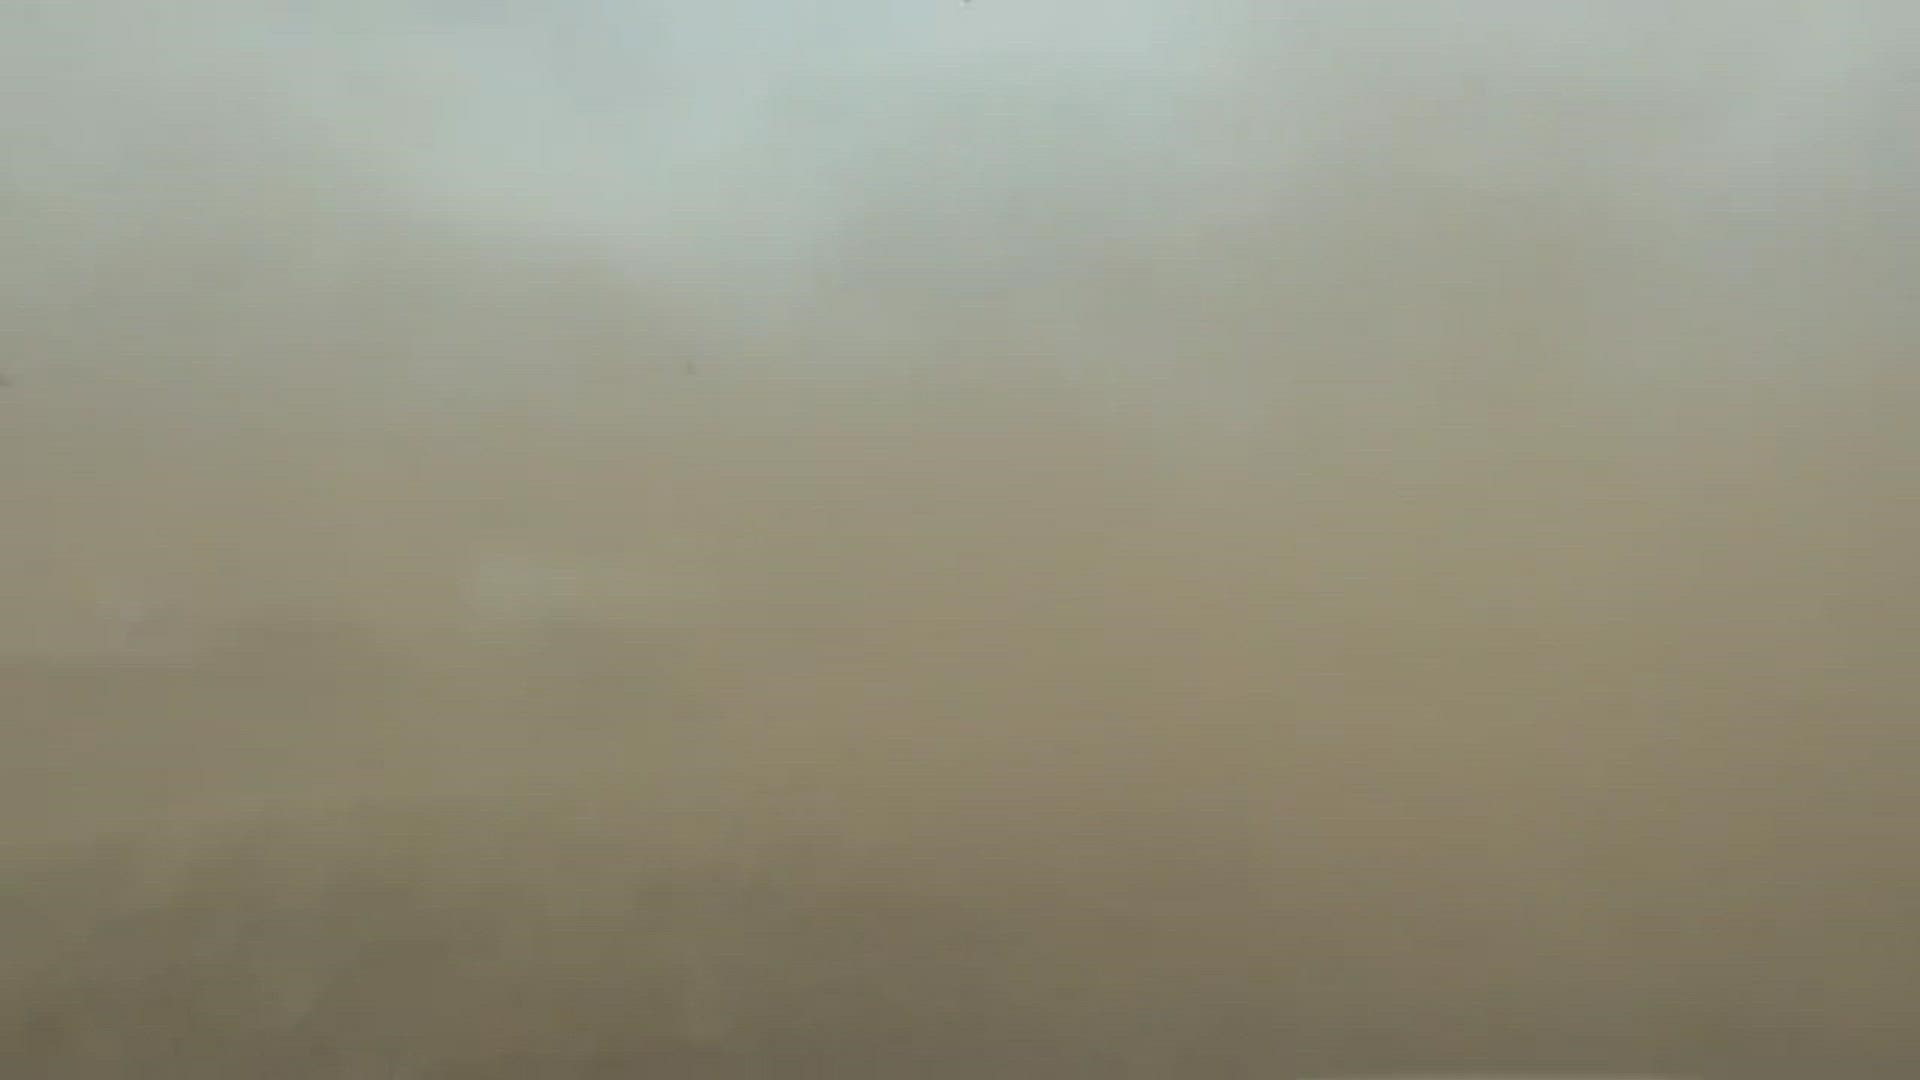 The Randall County Sheriff's Office in Amarillo shared this video of a heavy dust storm blowing through the Texas Panhandle on Tuesday.